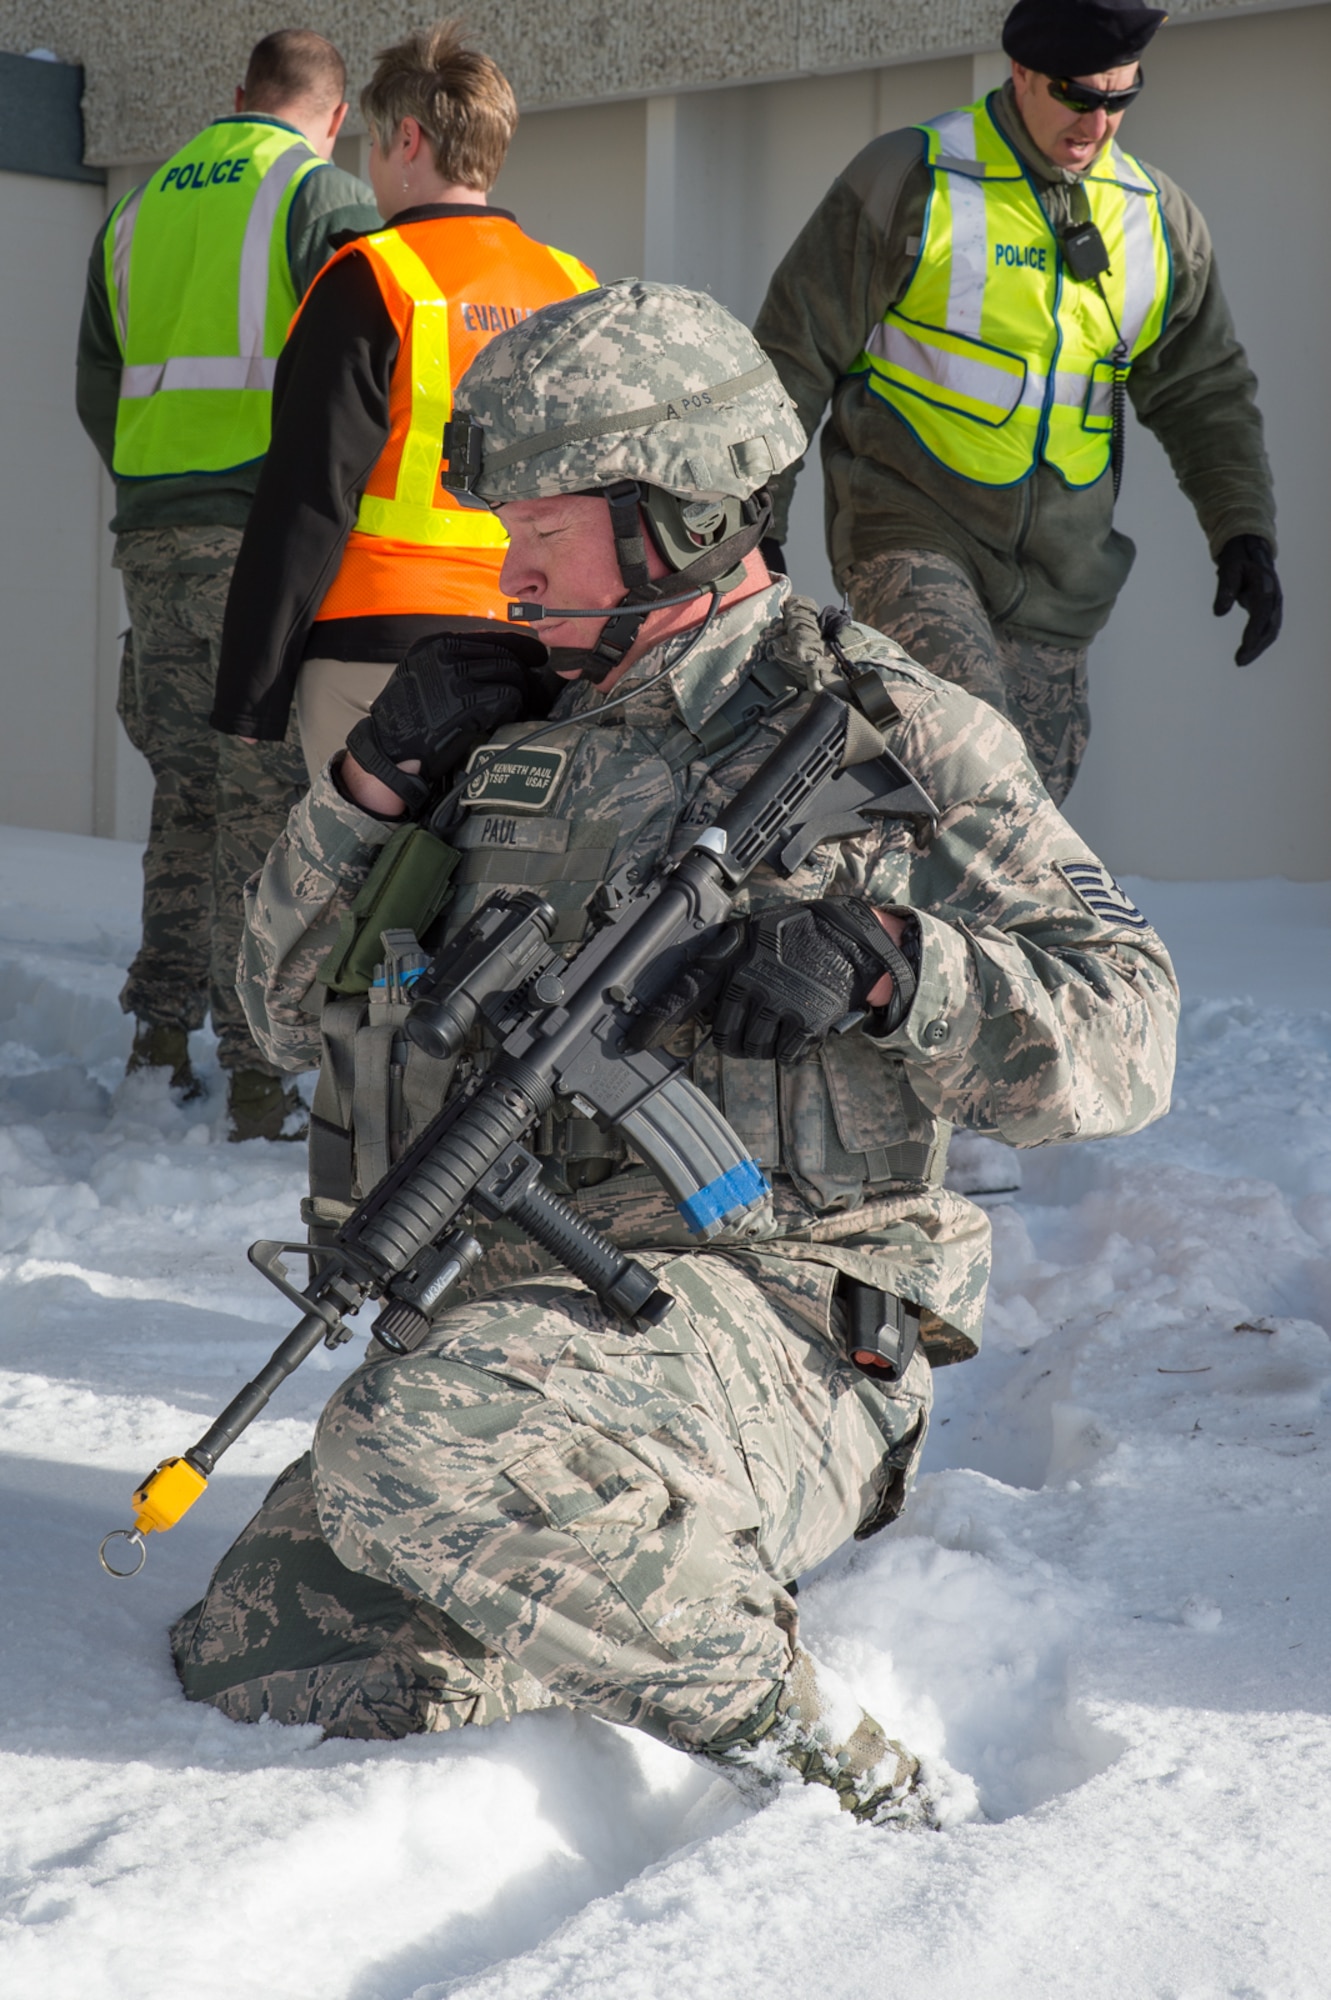 U.S. Air Force Tech. Sgt. Kenneth Paul, 153rd Security Forces Squadron, communicates with the Base Defense Operations Center, Dec. 18, 2015 at Cheyenne Air National Guard base in Cheyenne, Wyoming. Paul and several security forces Airmen chased down and eliminated a gunman during an exercise in which an active shooter attempted to fatally wound as many people as possible before being captured or killed. The scenario was in support of memorandum sent by Secretary of the Air Force Deborah James to test lockdown and active shooter procedures in response to shootings in Chattanooga, Tenn. (U.S. Air National Guard photo by Master Sgt. Charles Delano)